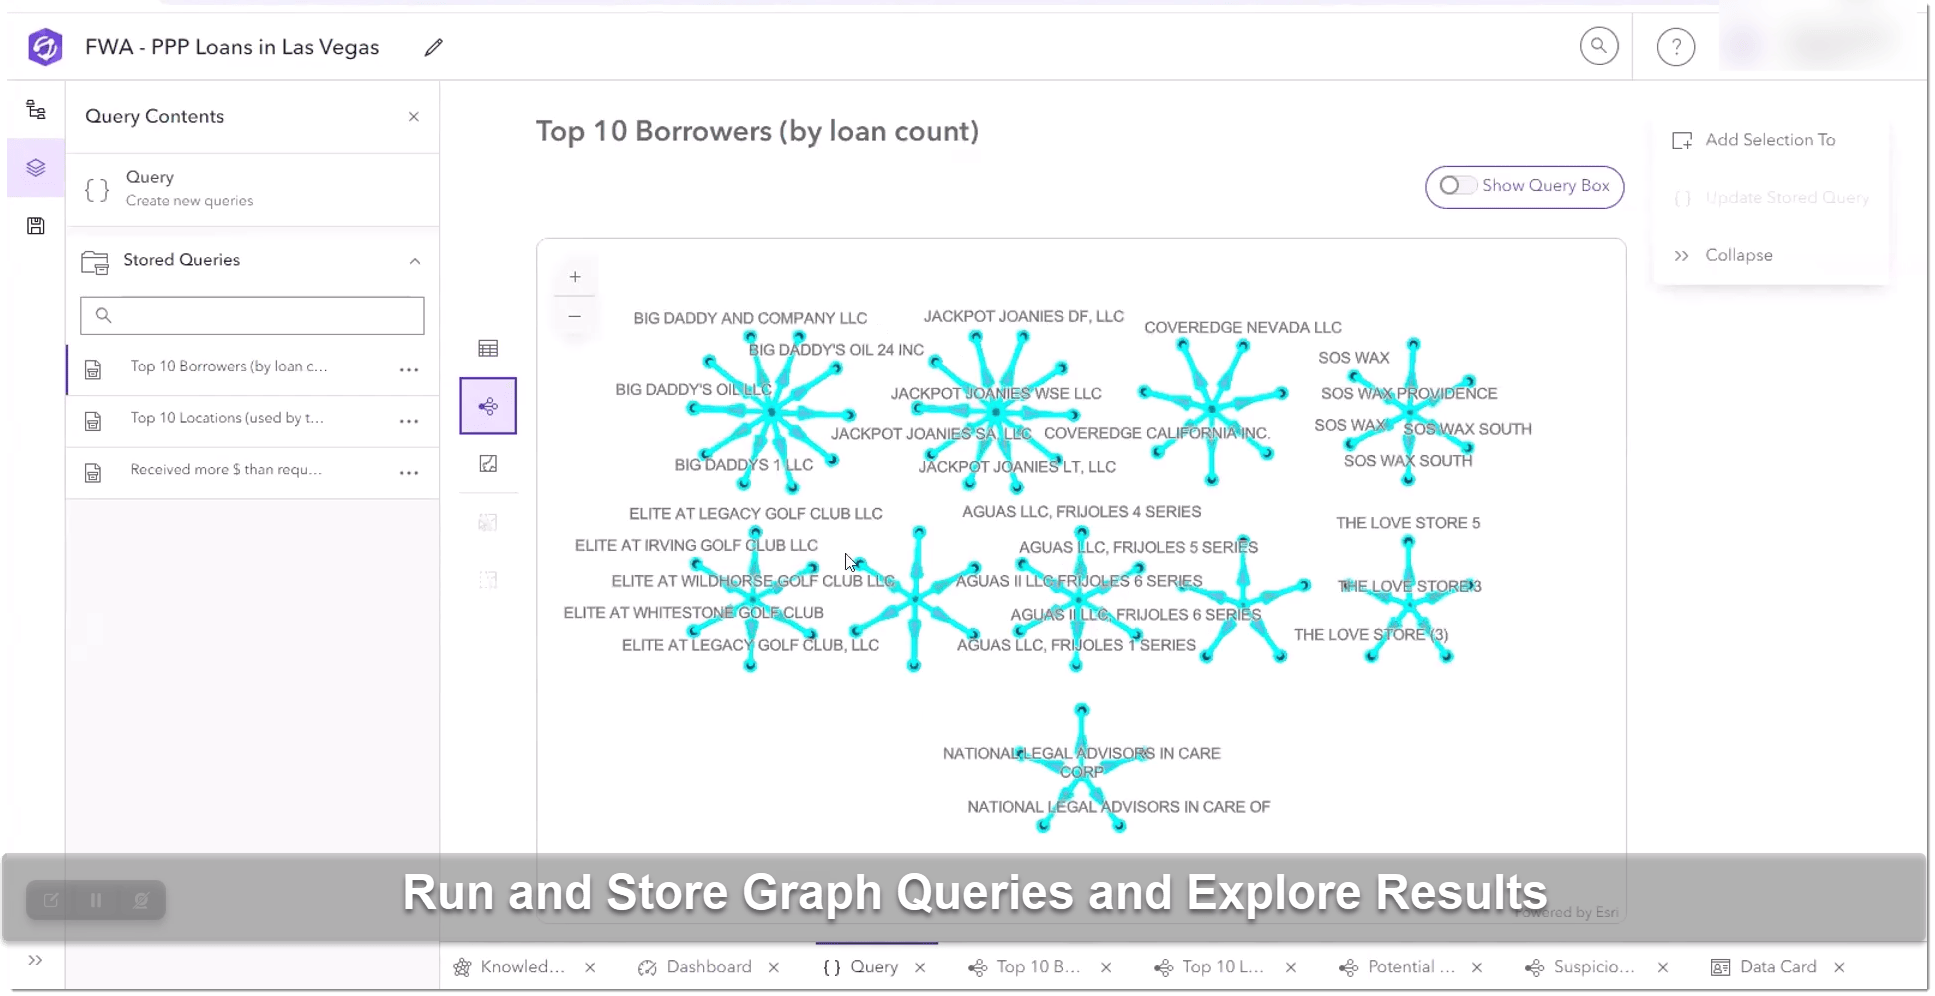 Run powerful graph queries, explore results, and save new queries for others to use.